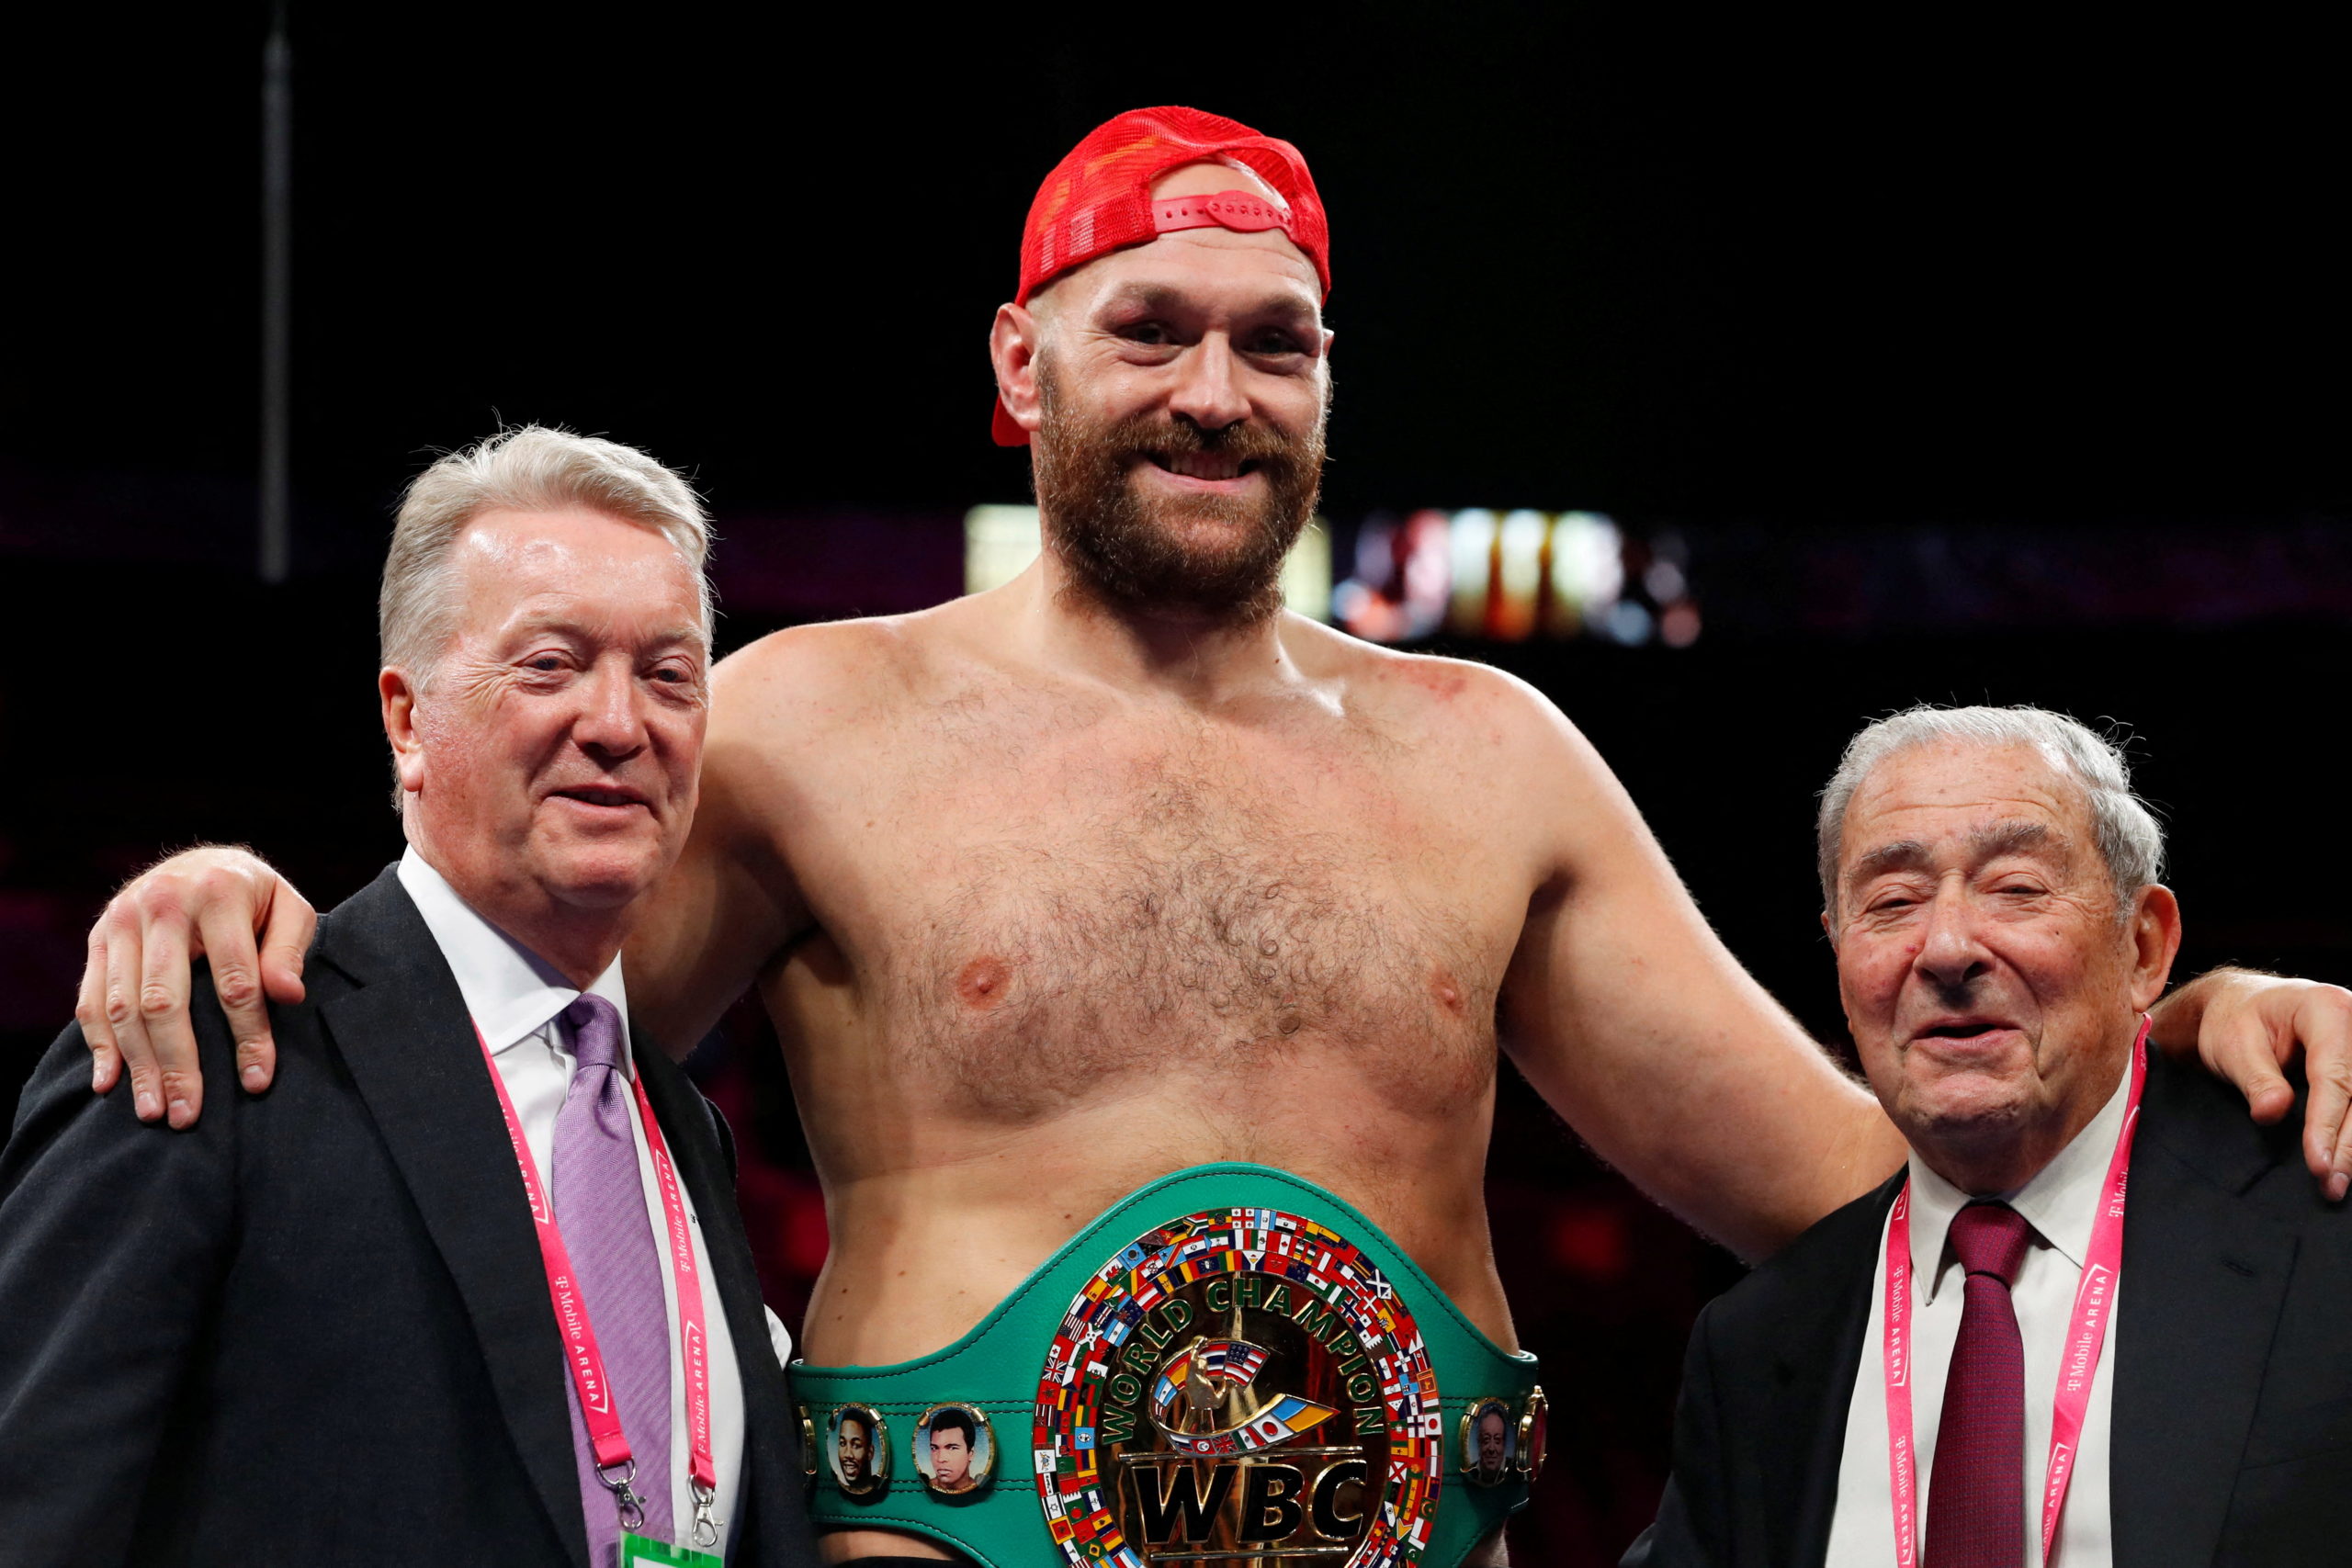 FILE PHOTO: Boxing - Tyson Fury v Deontay Wilder - WBC Heavyweight Title - T-Mobile Arena, Las Vegas, Nevada, U.S. - October 9, 2021 Tyson Fury poses for a photograph with promoters Frank Warren and Bob Arum during a press conference after winning the fight against Deontay Wilder